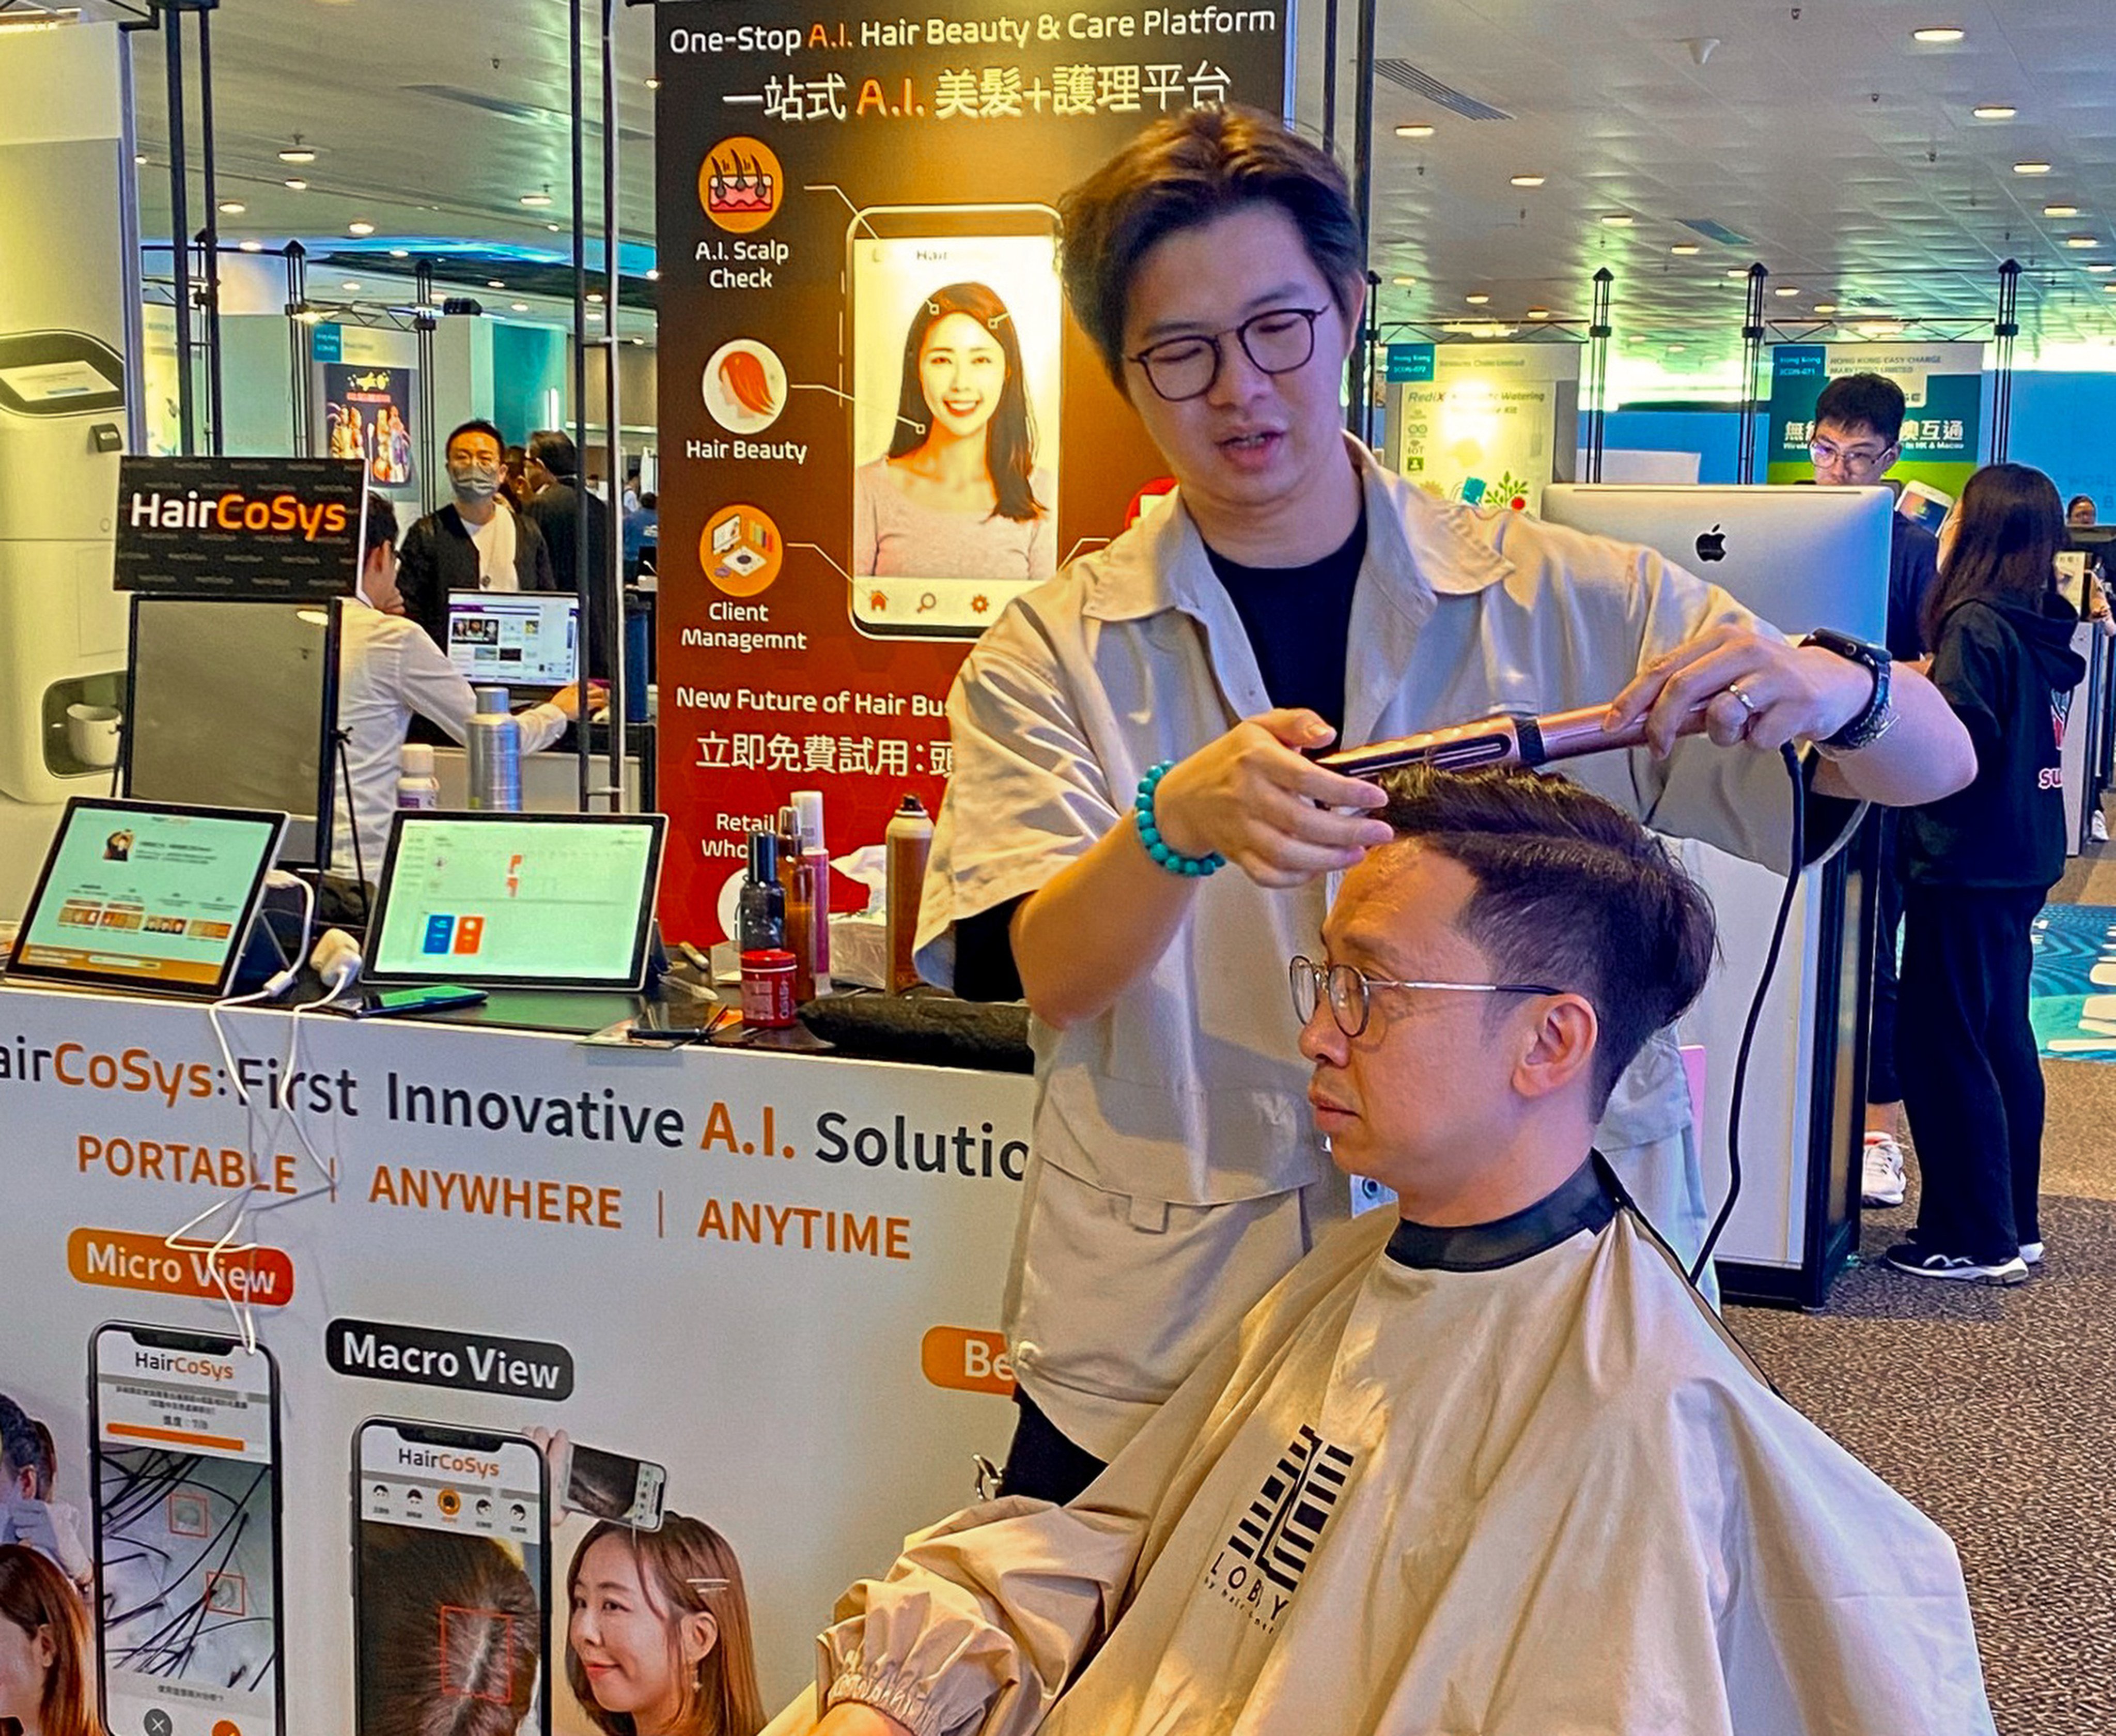 HairCoSys demonstrates its artificial intelligence solution for the hair care industry at the Hong Kong International Innovation Expo in April this year. Photo: Facebook/HairCoSys